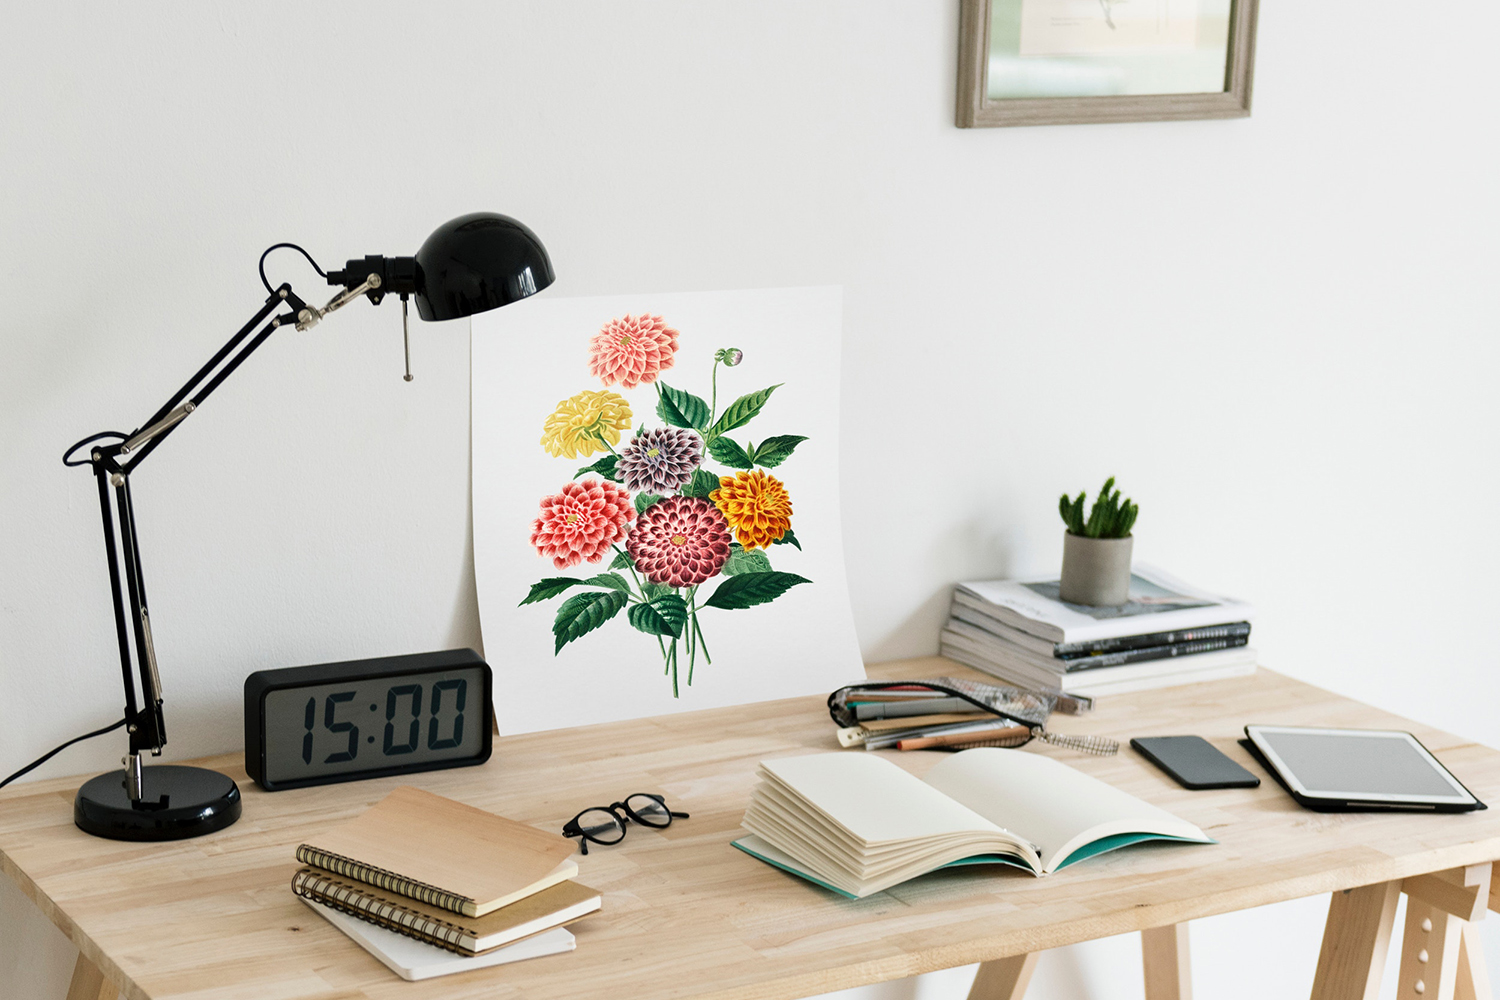 6 study tips — A modern wood desk topped with a black desk lamp, a large digital clock that reads "15:00", a colourful painting of a bouquet of flowers, several notebooks, a pair of glasses, a pencil case with highlighters tumbling out, a cell phone and tablet, and in the corner a stack of books topped by a small succulent plant.